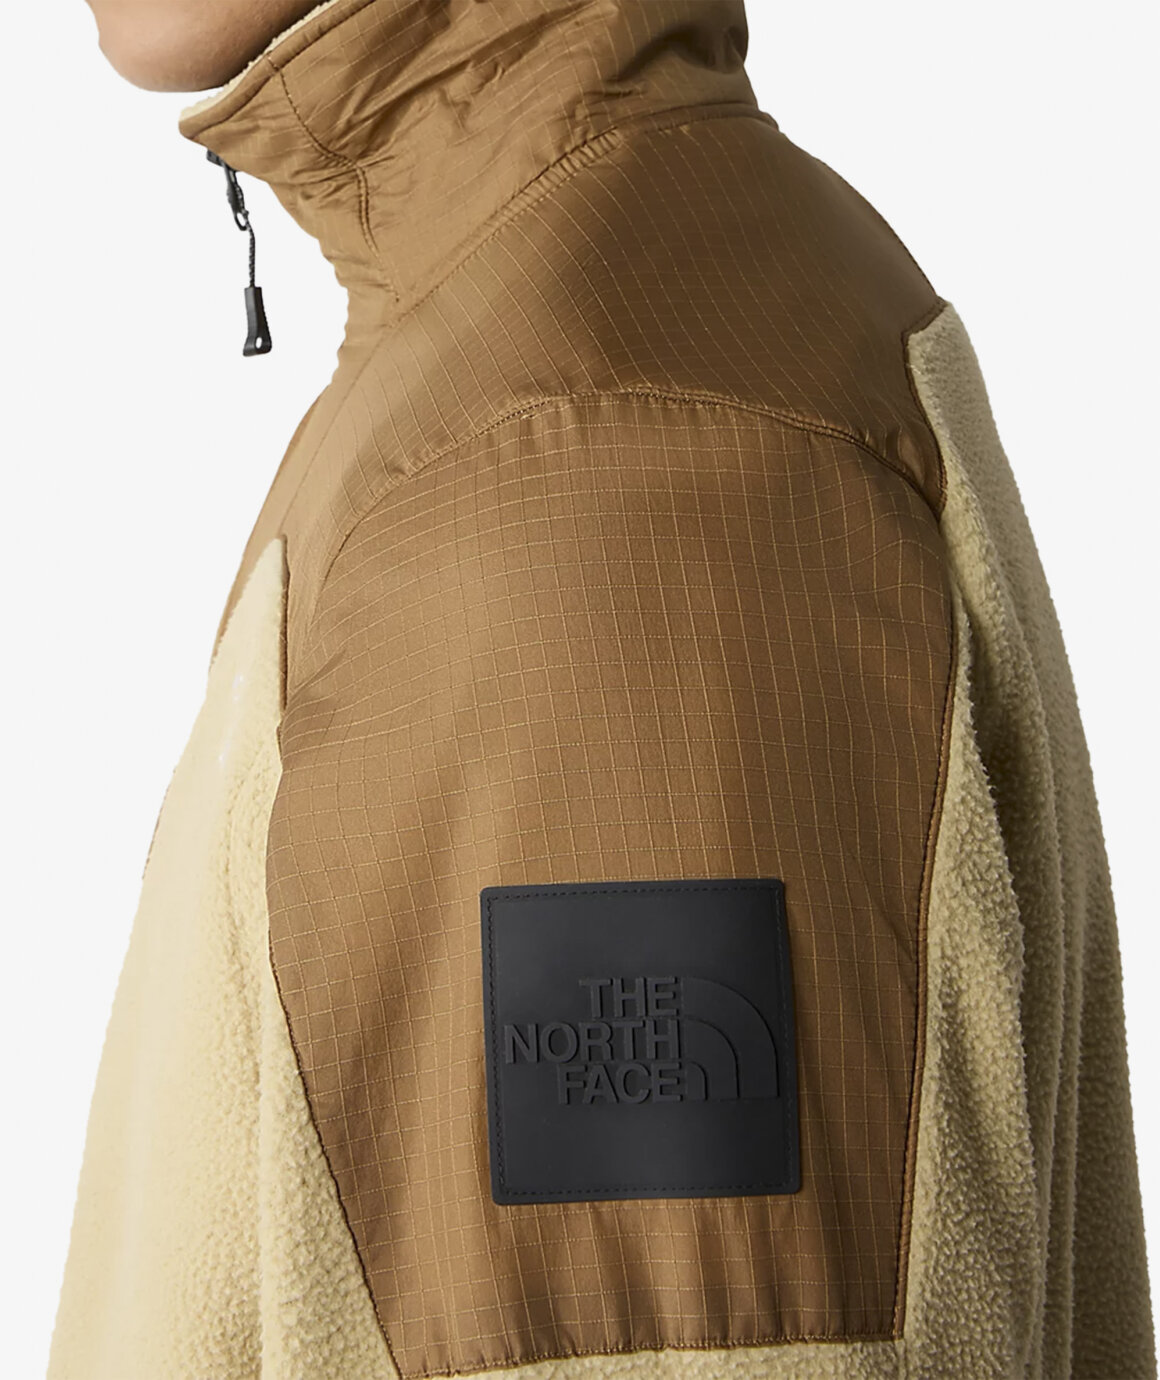 Norse Store | Shipping Worldwide - The North Face M FLEESKI Y2K JACKET ...